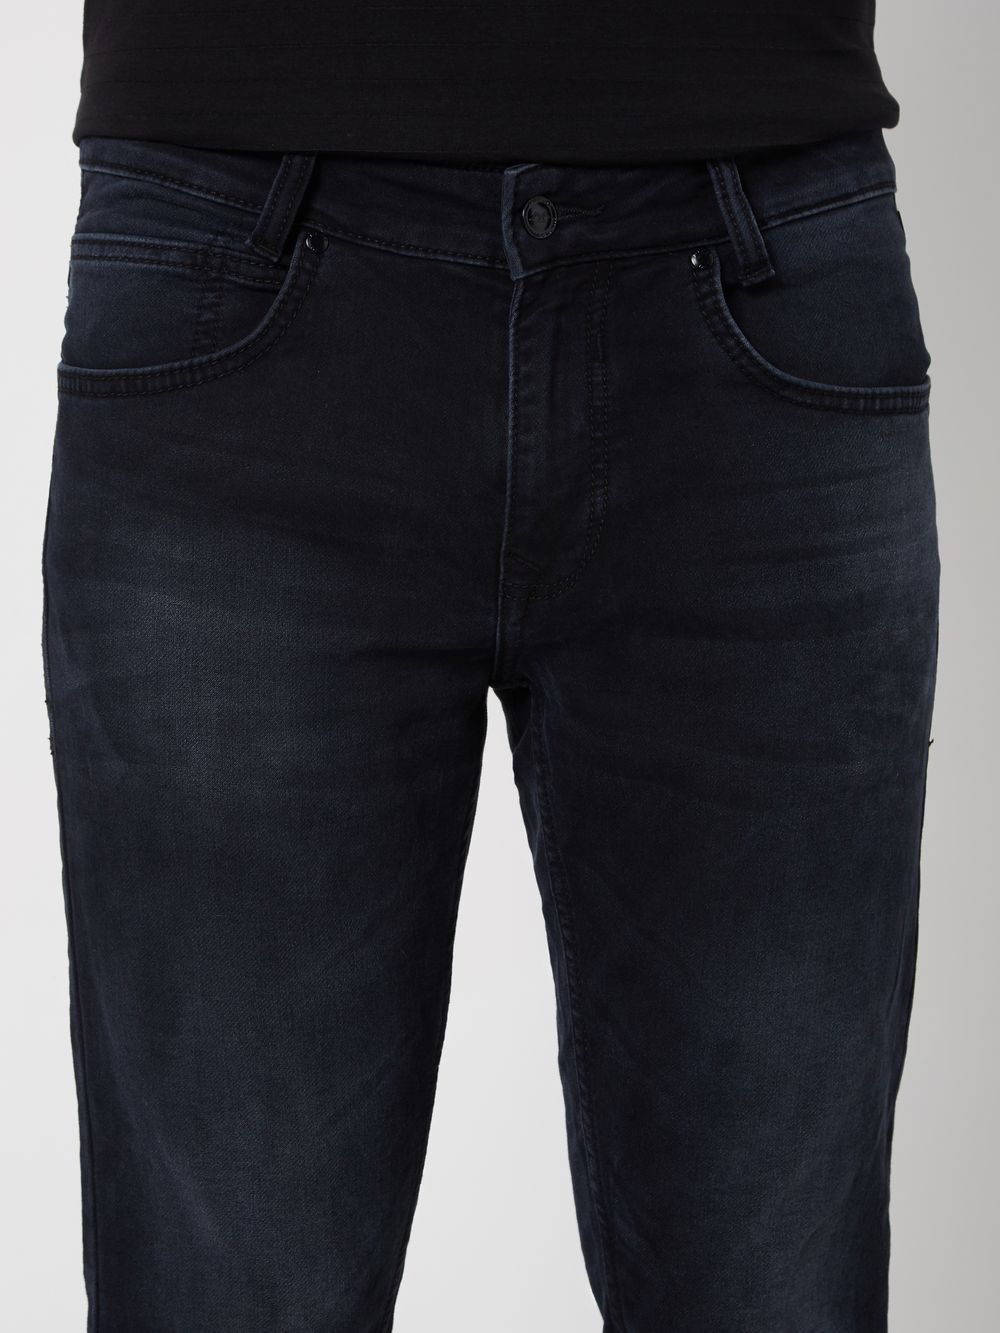 Black Ankle Length Denim Deluxe Stretch Jeans